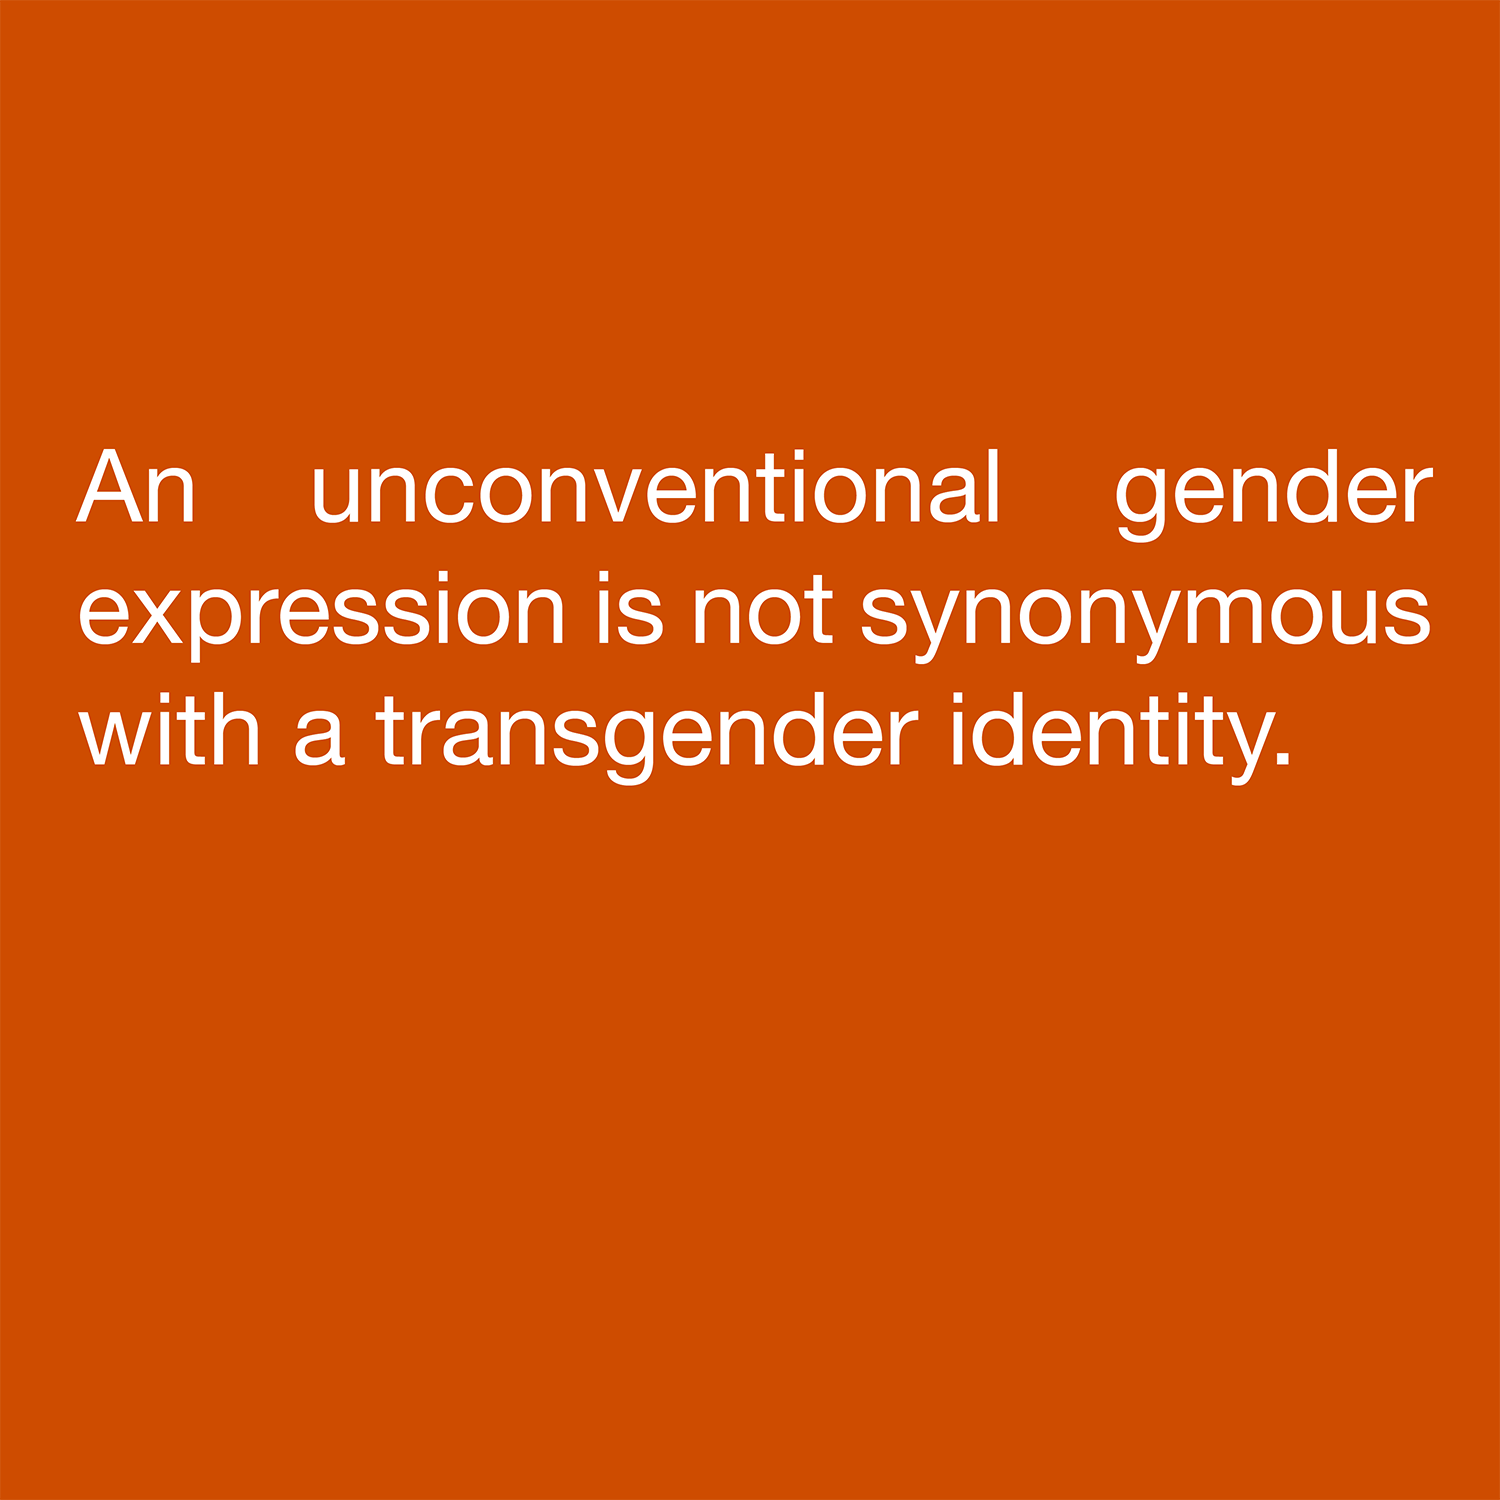  An unconventional gender expression is not synonymous with a transgender identity. 